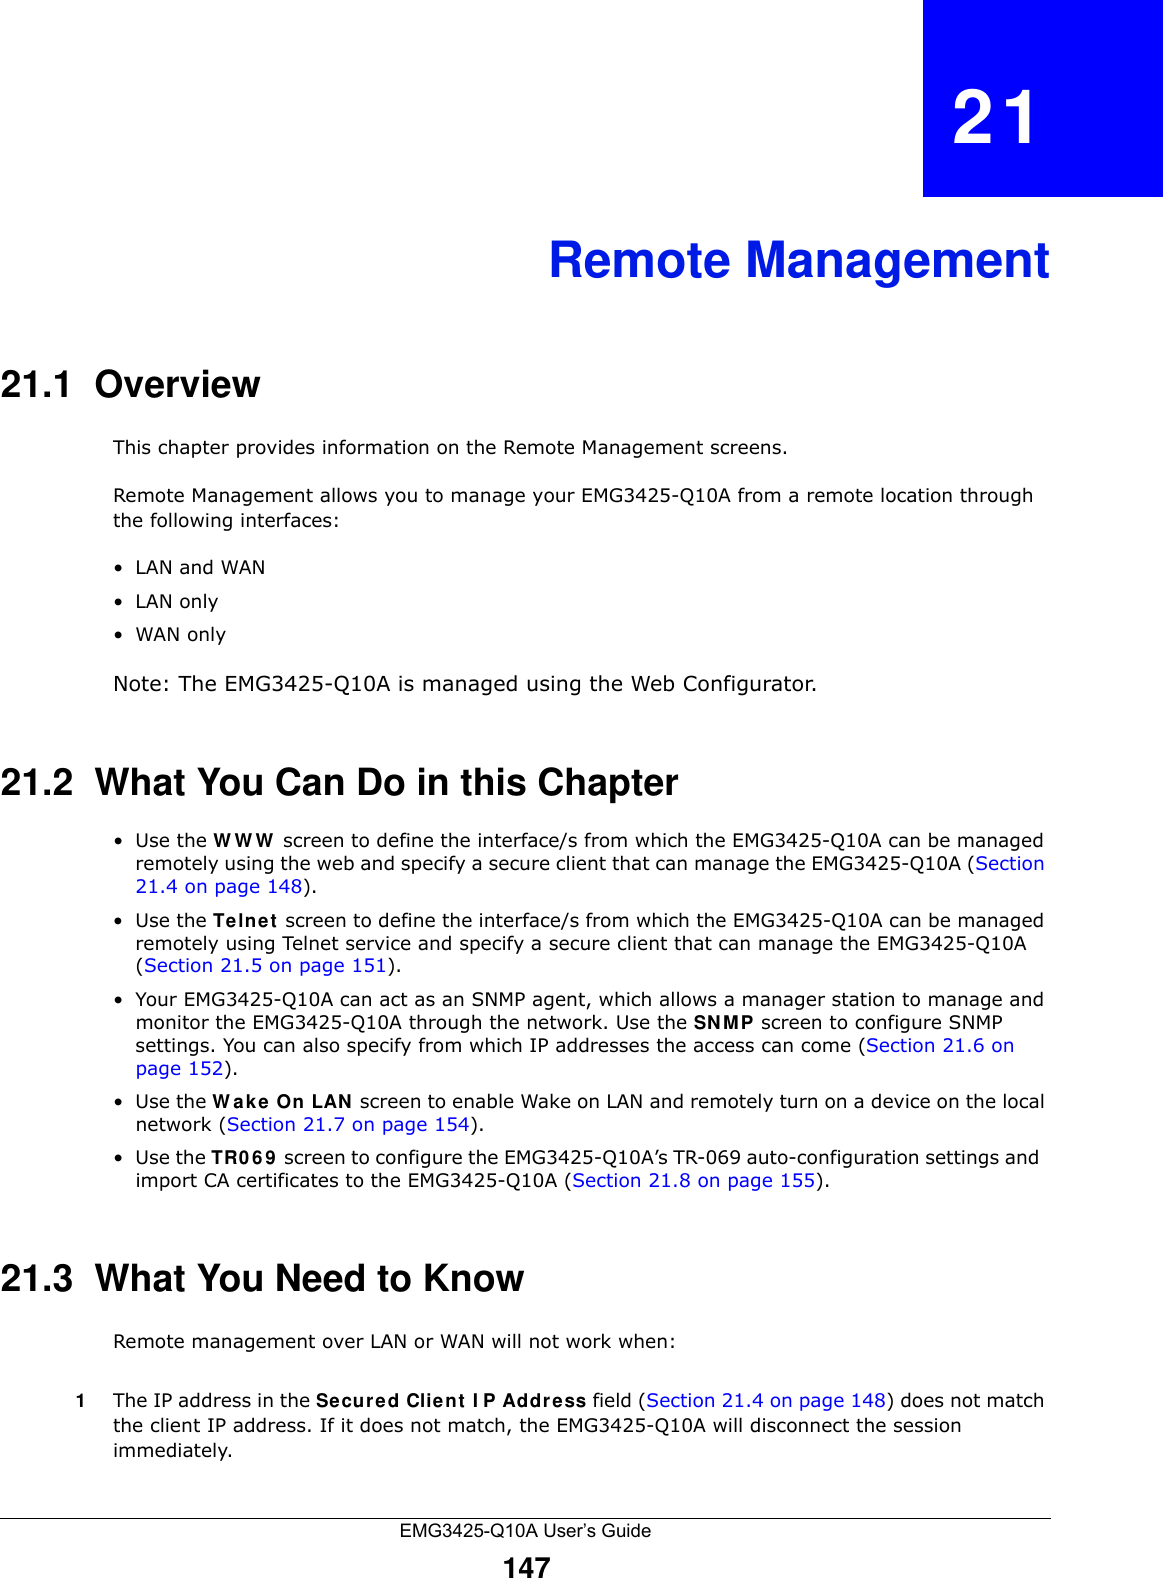 EMG3425-Q10A User’s Guide147CHAPTER   21Remote Management21.1  OverviewThis chapter provides information on the Remote Management screens. Remote Management allows you to manage your EMG3425-Q10A from a remote location through the following interfaces:•LAN and WAN•LAN only•WAN onlyNote: The EMG3425-Q10A is managed using the Web Configurator.21.2  What You Can Do in this Chapter•Use the WWW screen to define the interface/s from which the EMG3425-Q10A can be managed remotely using the web and specify a secure client that can manage the EMG3425-Q10A (Section 21.4 on page 148).•Use the Te lnet  screen to define the interface/s from which the EMG3425-Q10A can be managed remotely using Telnet service and specify a secure client that can manage the EMG3425-Q10A (Section 21.5 on page 151).• Your EMG3425-Q10A can act as an SNMP agent, which allows a manager station to manage and monitor the EMG3425-Q10A through the network. Use the SN M P screen to configure SNMP settings. You can also specify from which IP addresses the access can come (Section 21.6 on page 152).•Use the W a k e On LAN screen to enable Wake on LAN and remotely turn on a device on the local network (Section 21.7 on page 154).•Use the TR0 6 9  screen to configure the EMG3425-Q10A’s TR-069 auto-configuration settings and  import CA certificates to the EMG3425-Q10A (Section 21.8 on page 155).21.3  What You Need to KnowRemote management over LAN or WAN will not work when:1The IP address in the Secured Clie n t  I P Addre ss field (Section 21.4 on page 148) does not match the client IP address. If it does not match, the EMG3425-Q10A will disconnect the session immediately.